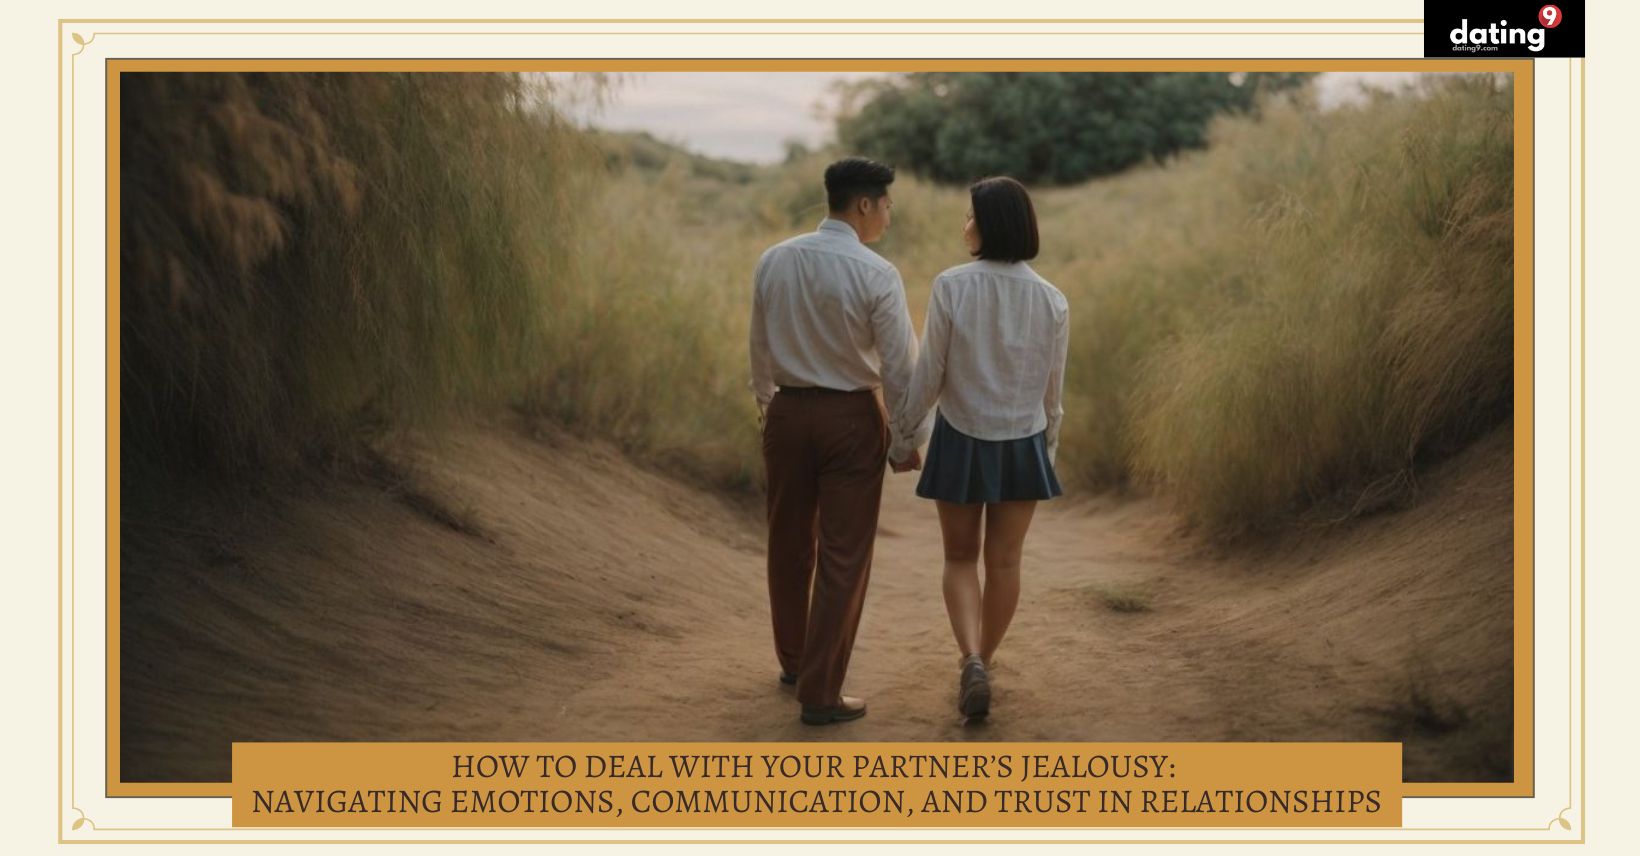 How to Deal With Your Partner’s Jealousy: Navigating Emotions, Communication, and Trust in Relationships